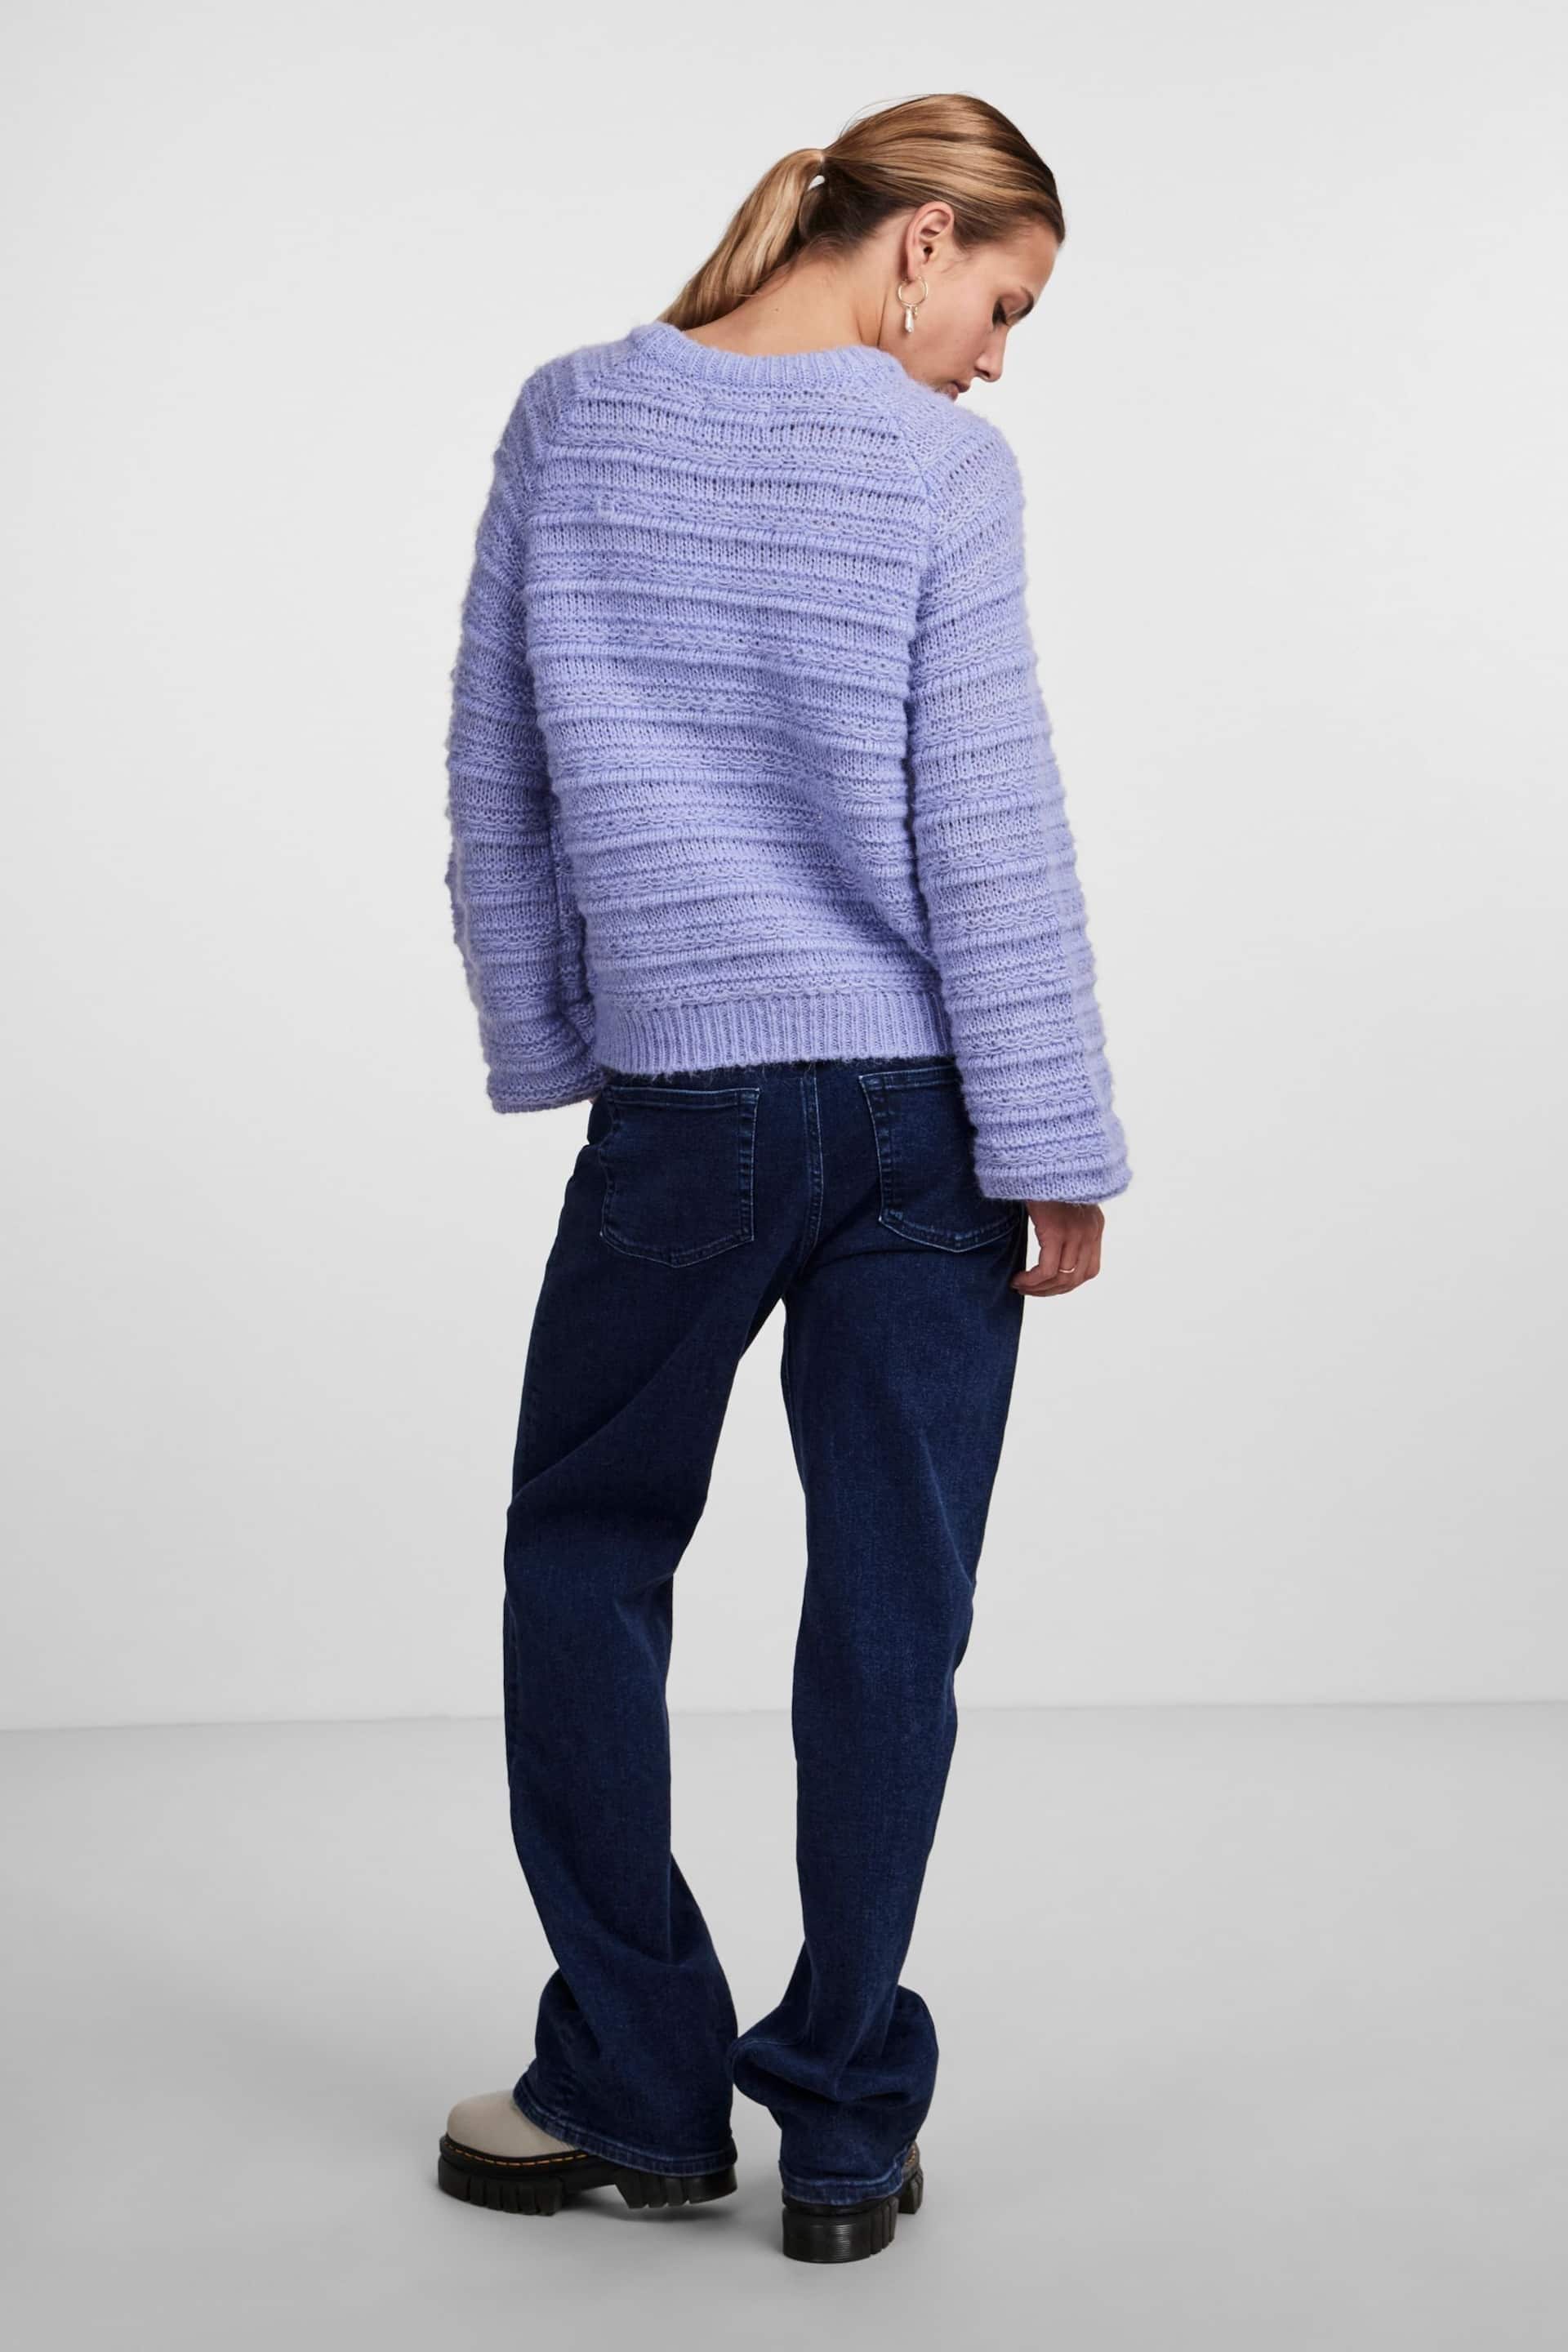 PIECES Blue Cosy Long Sleeve Jumper - Image 2 of 5